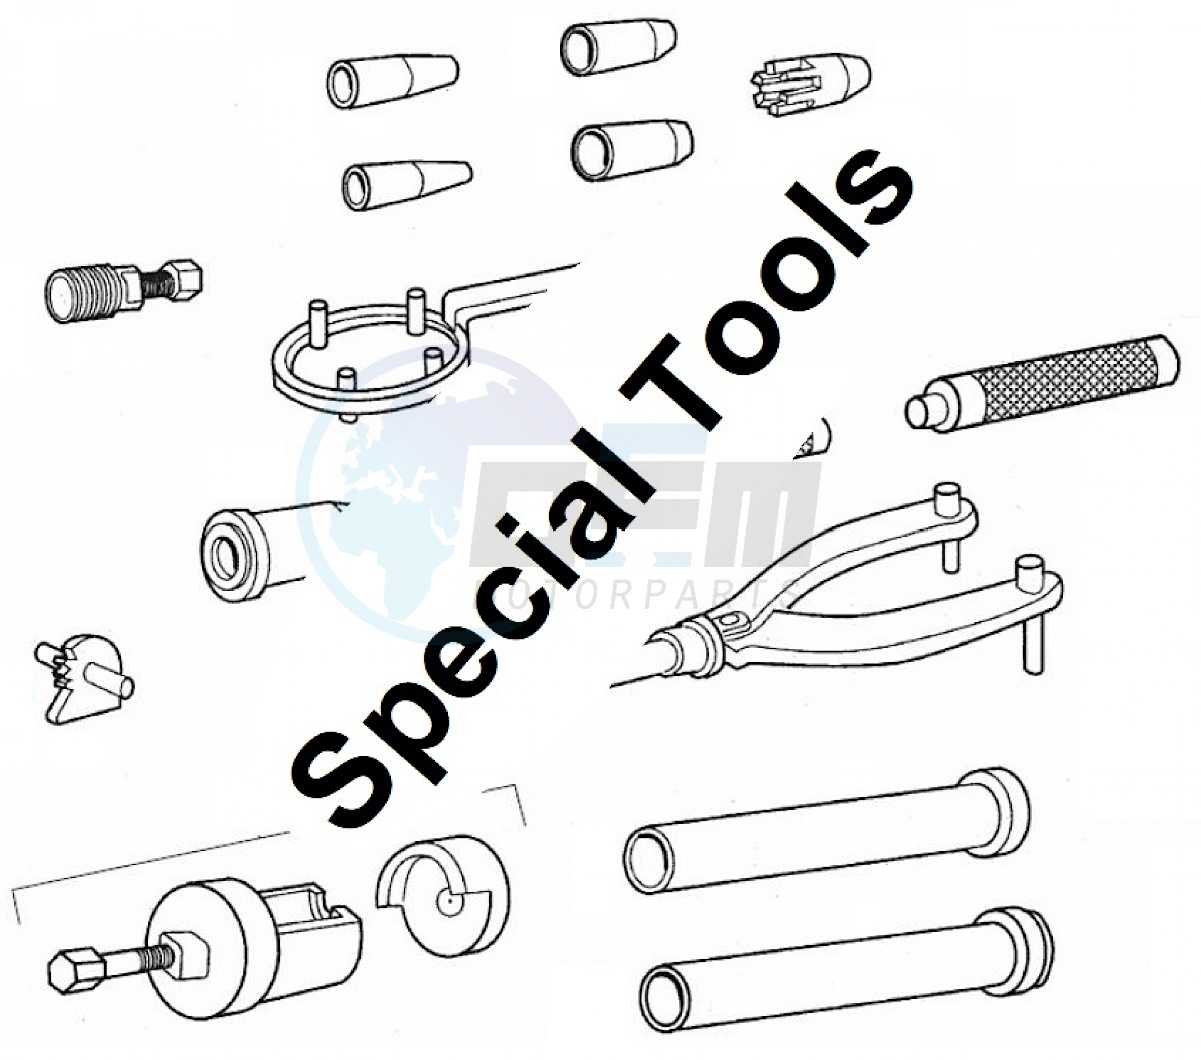 Tools (Positions) image